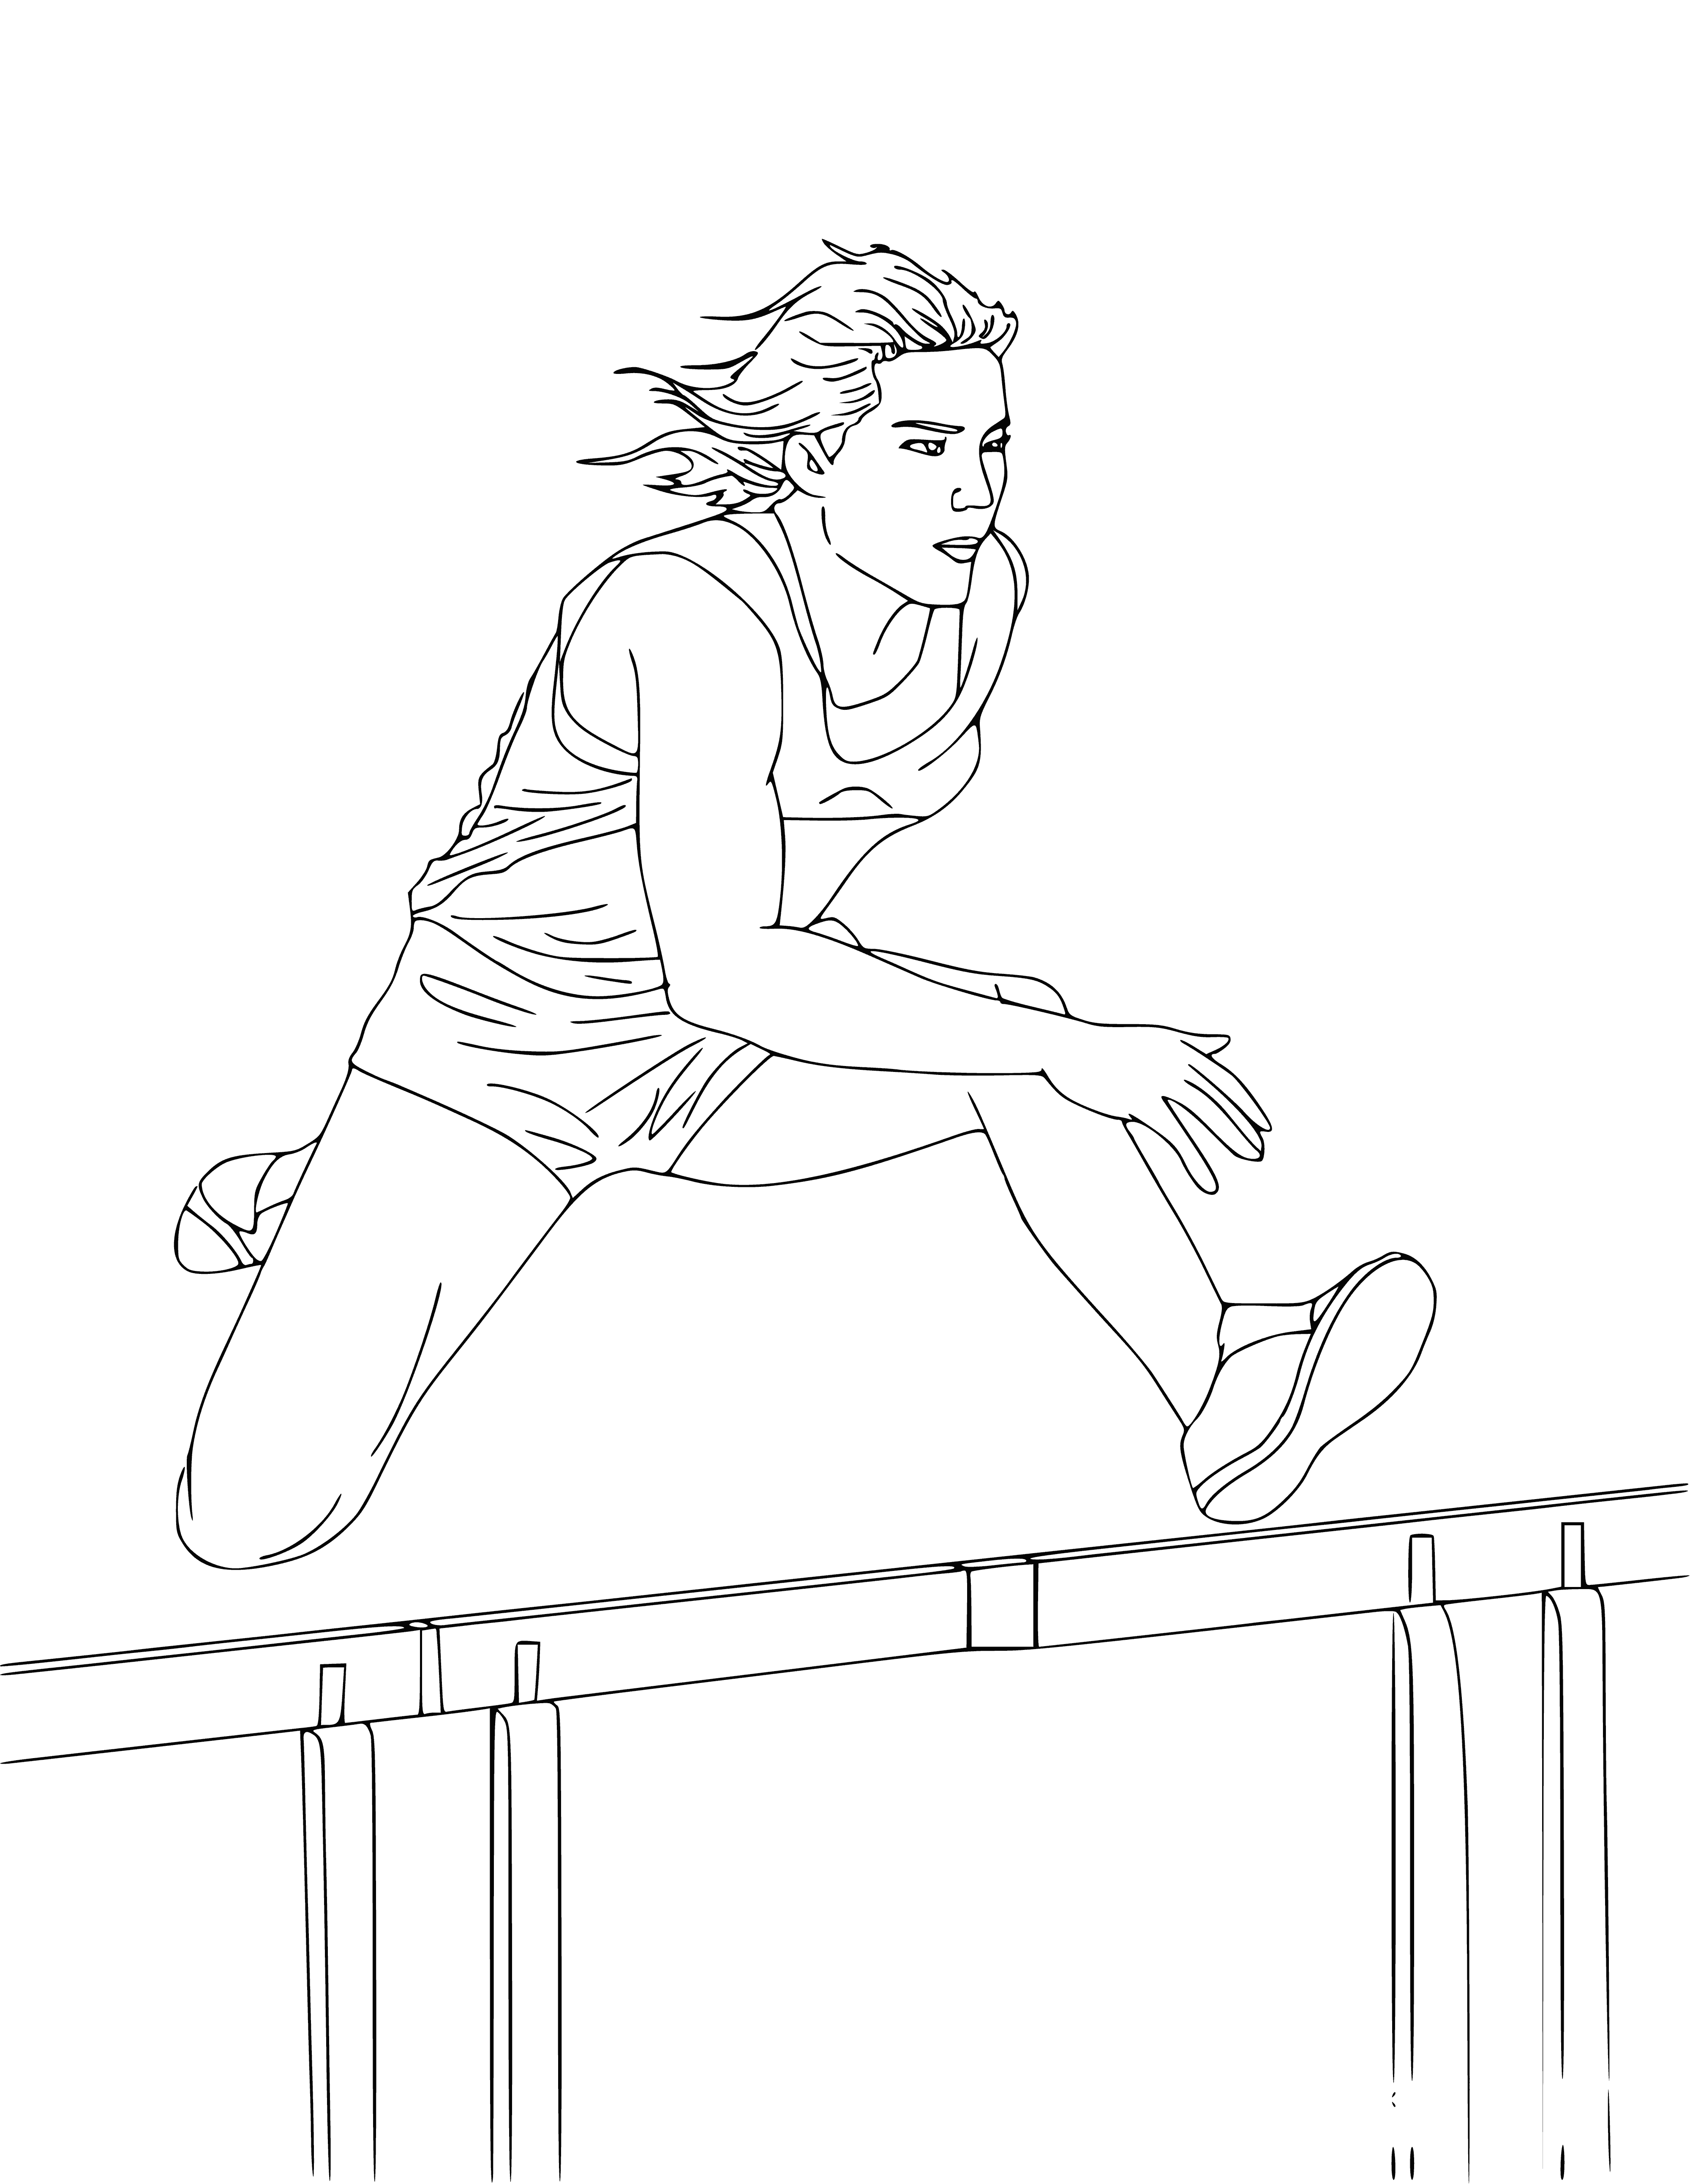 coloring page: Person hurdle racing in athletic gear, jumping over obstacles in their way. #trackandfield